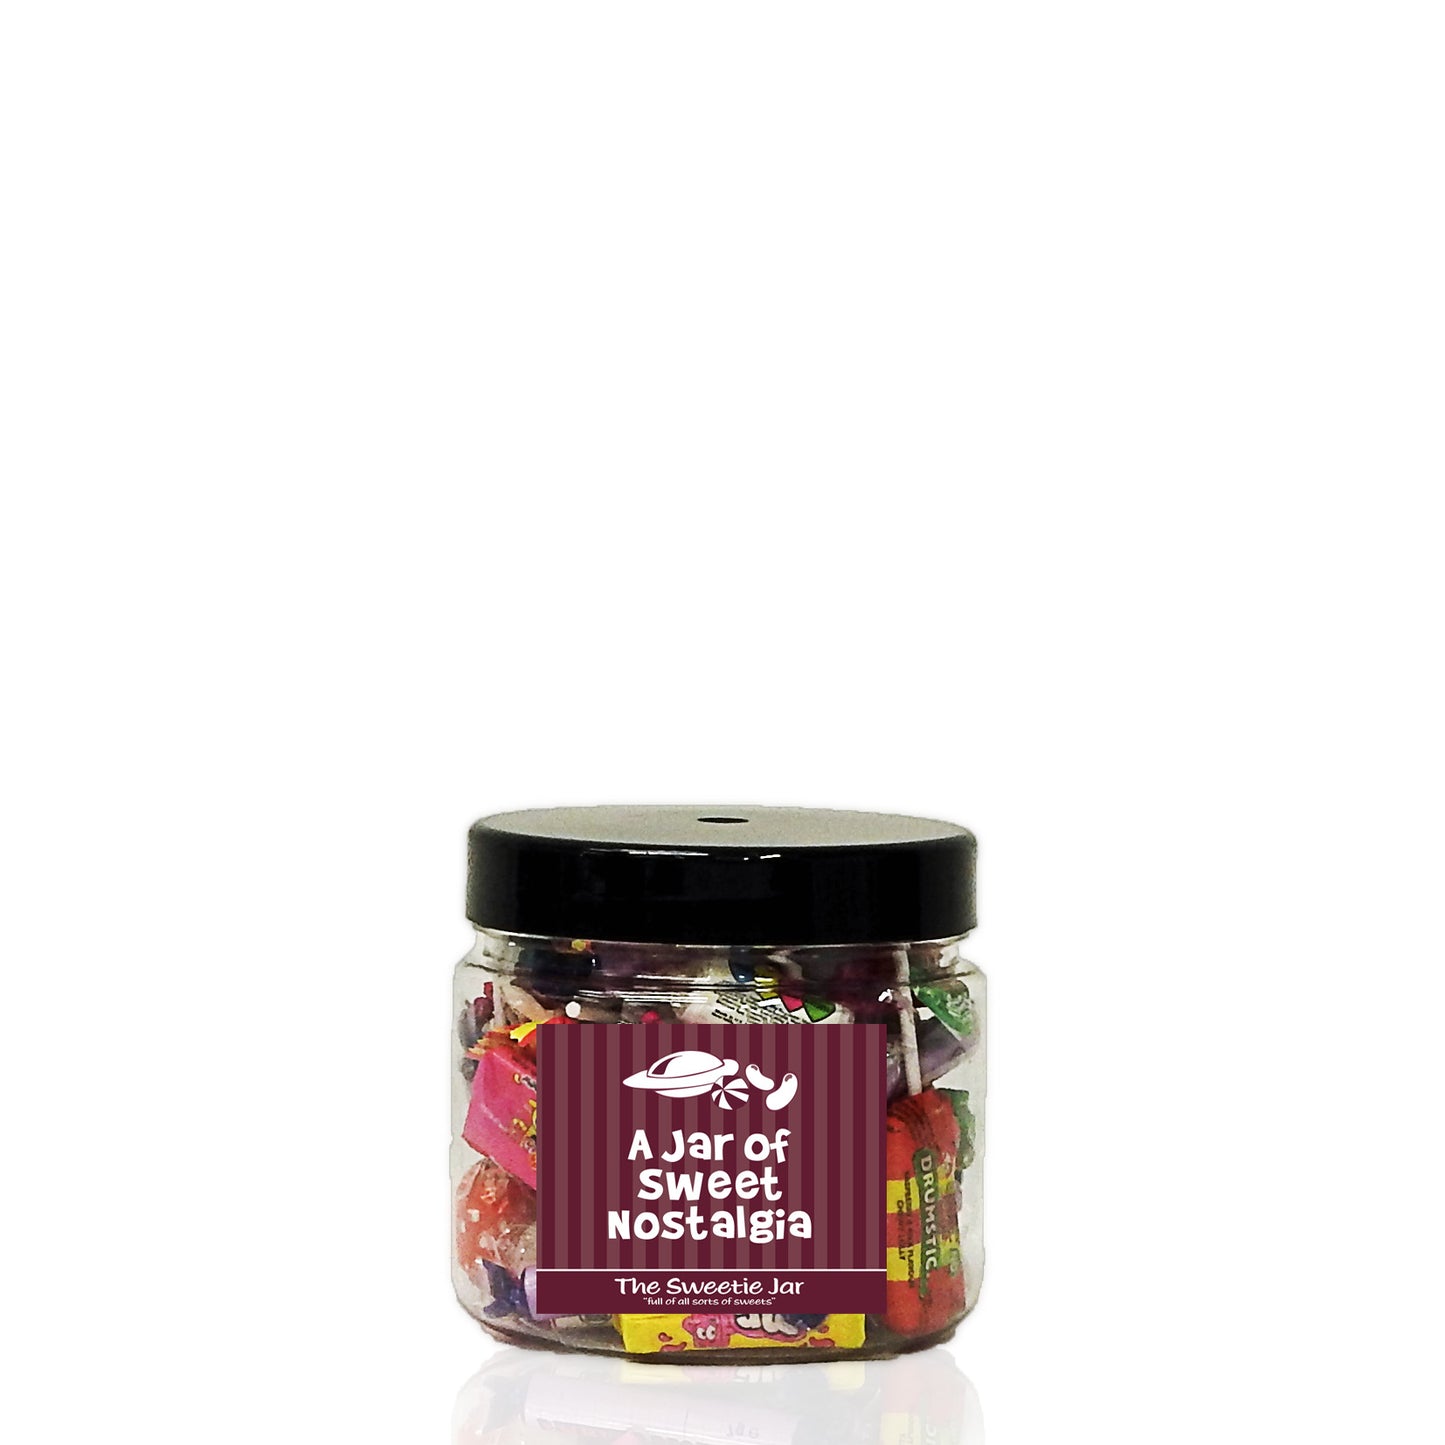 An XSmall Jar of Variety Mix - Retro Sweet Jars at The Sweetie Jar